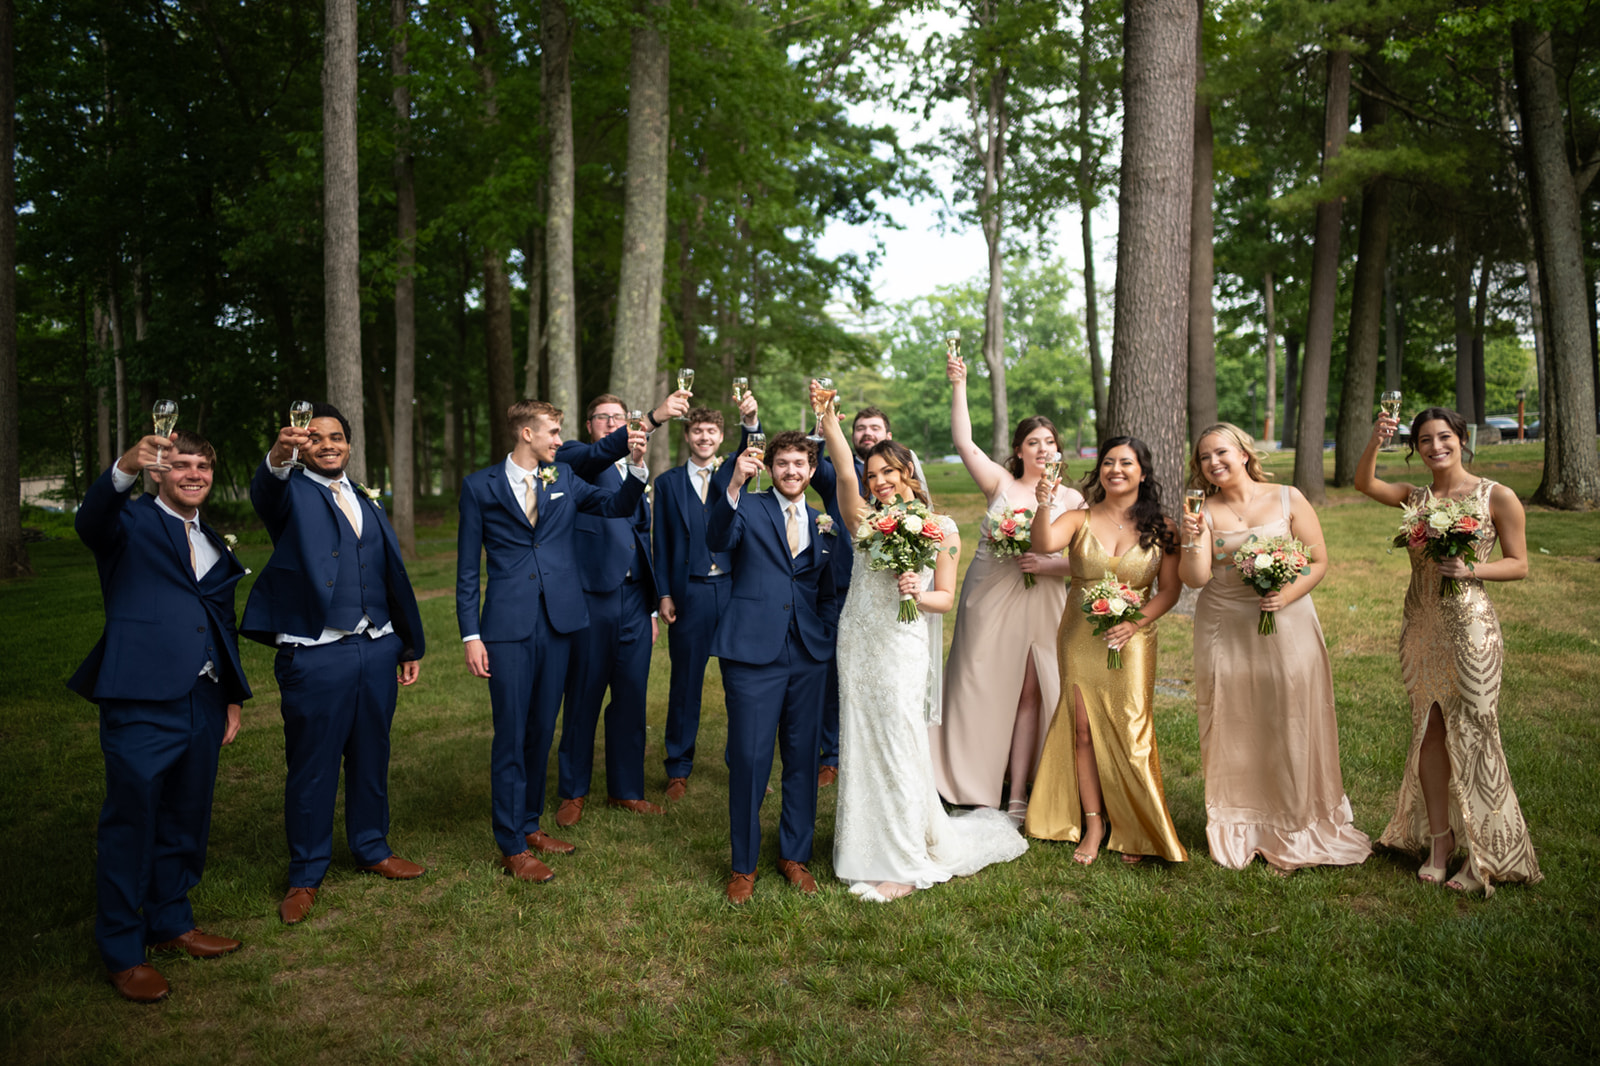 Panoramic view of a serene wedding party in the lush Poconos, showcasing nature's beauty as a backdrop.